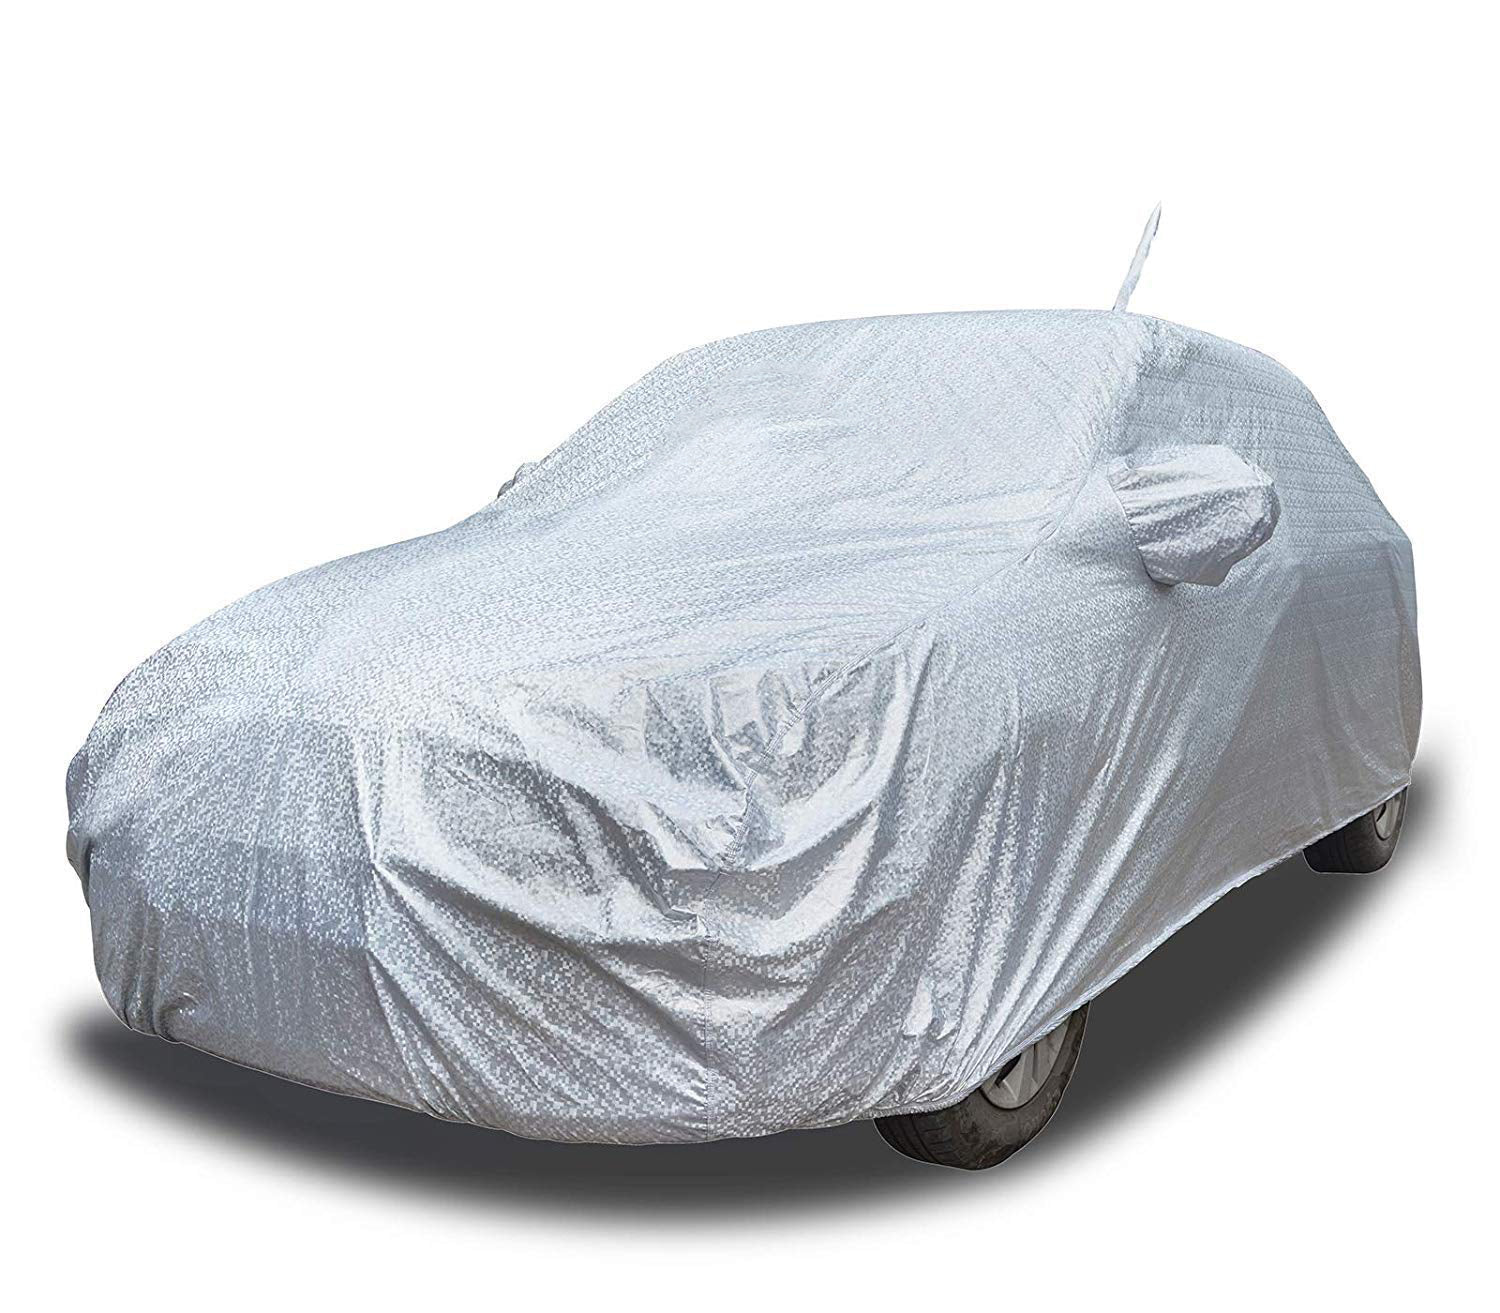 BOTAUTO Car Cover For Tata Punch, Universal For Car (With Mirror